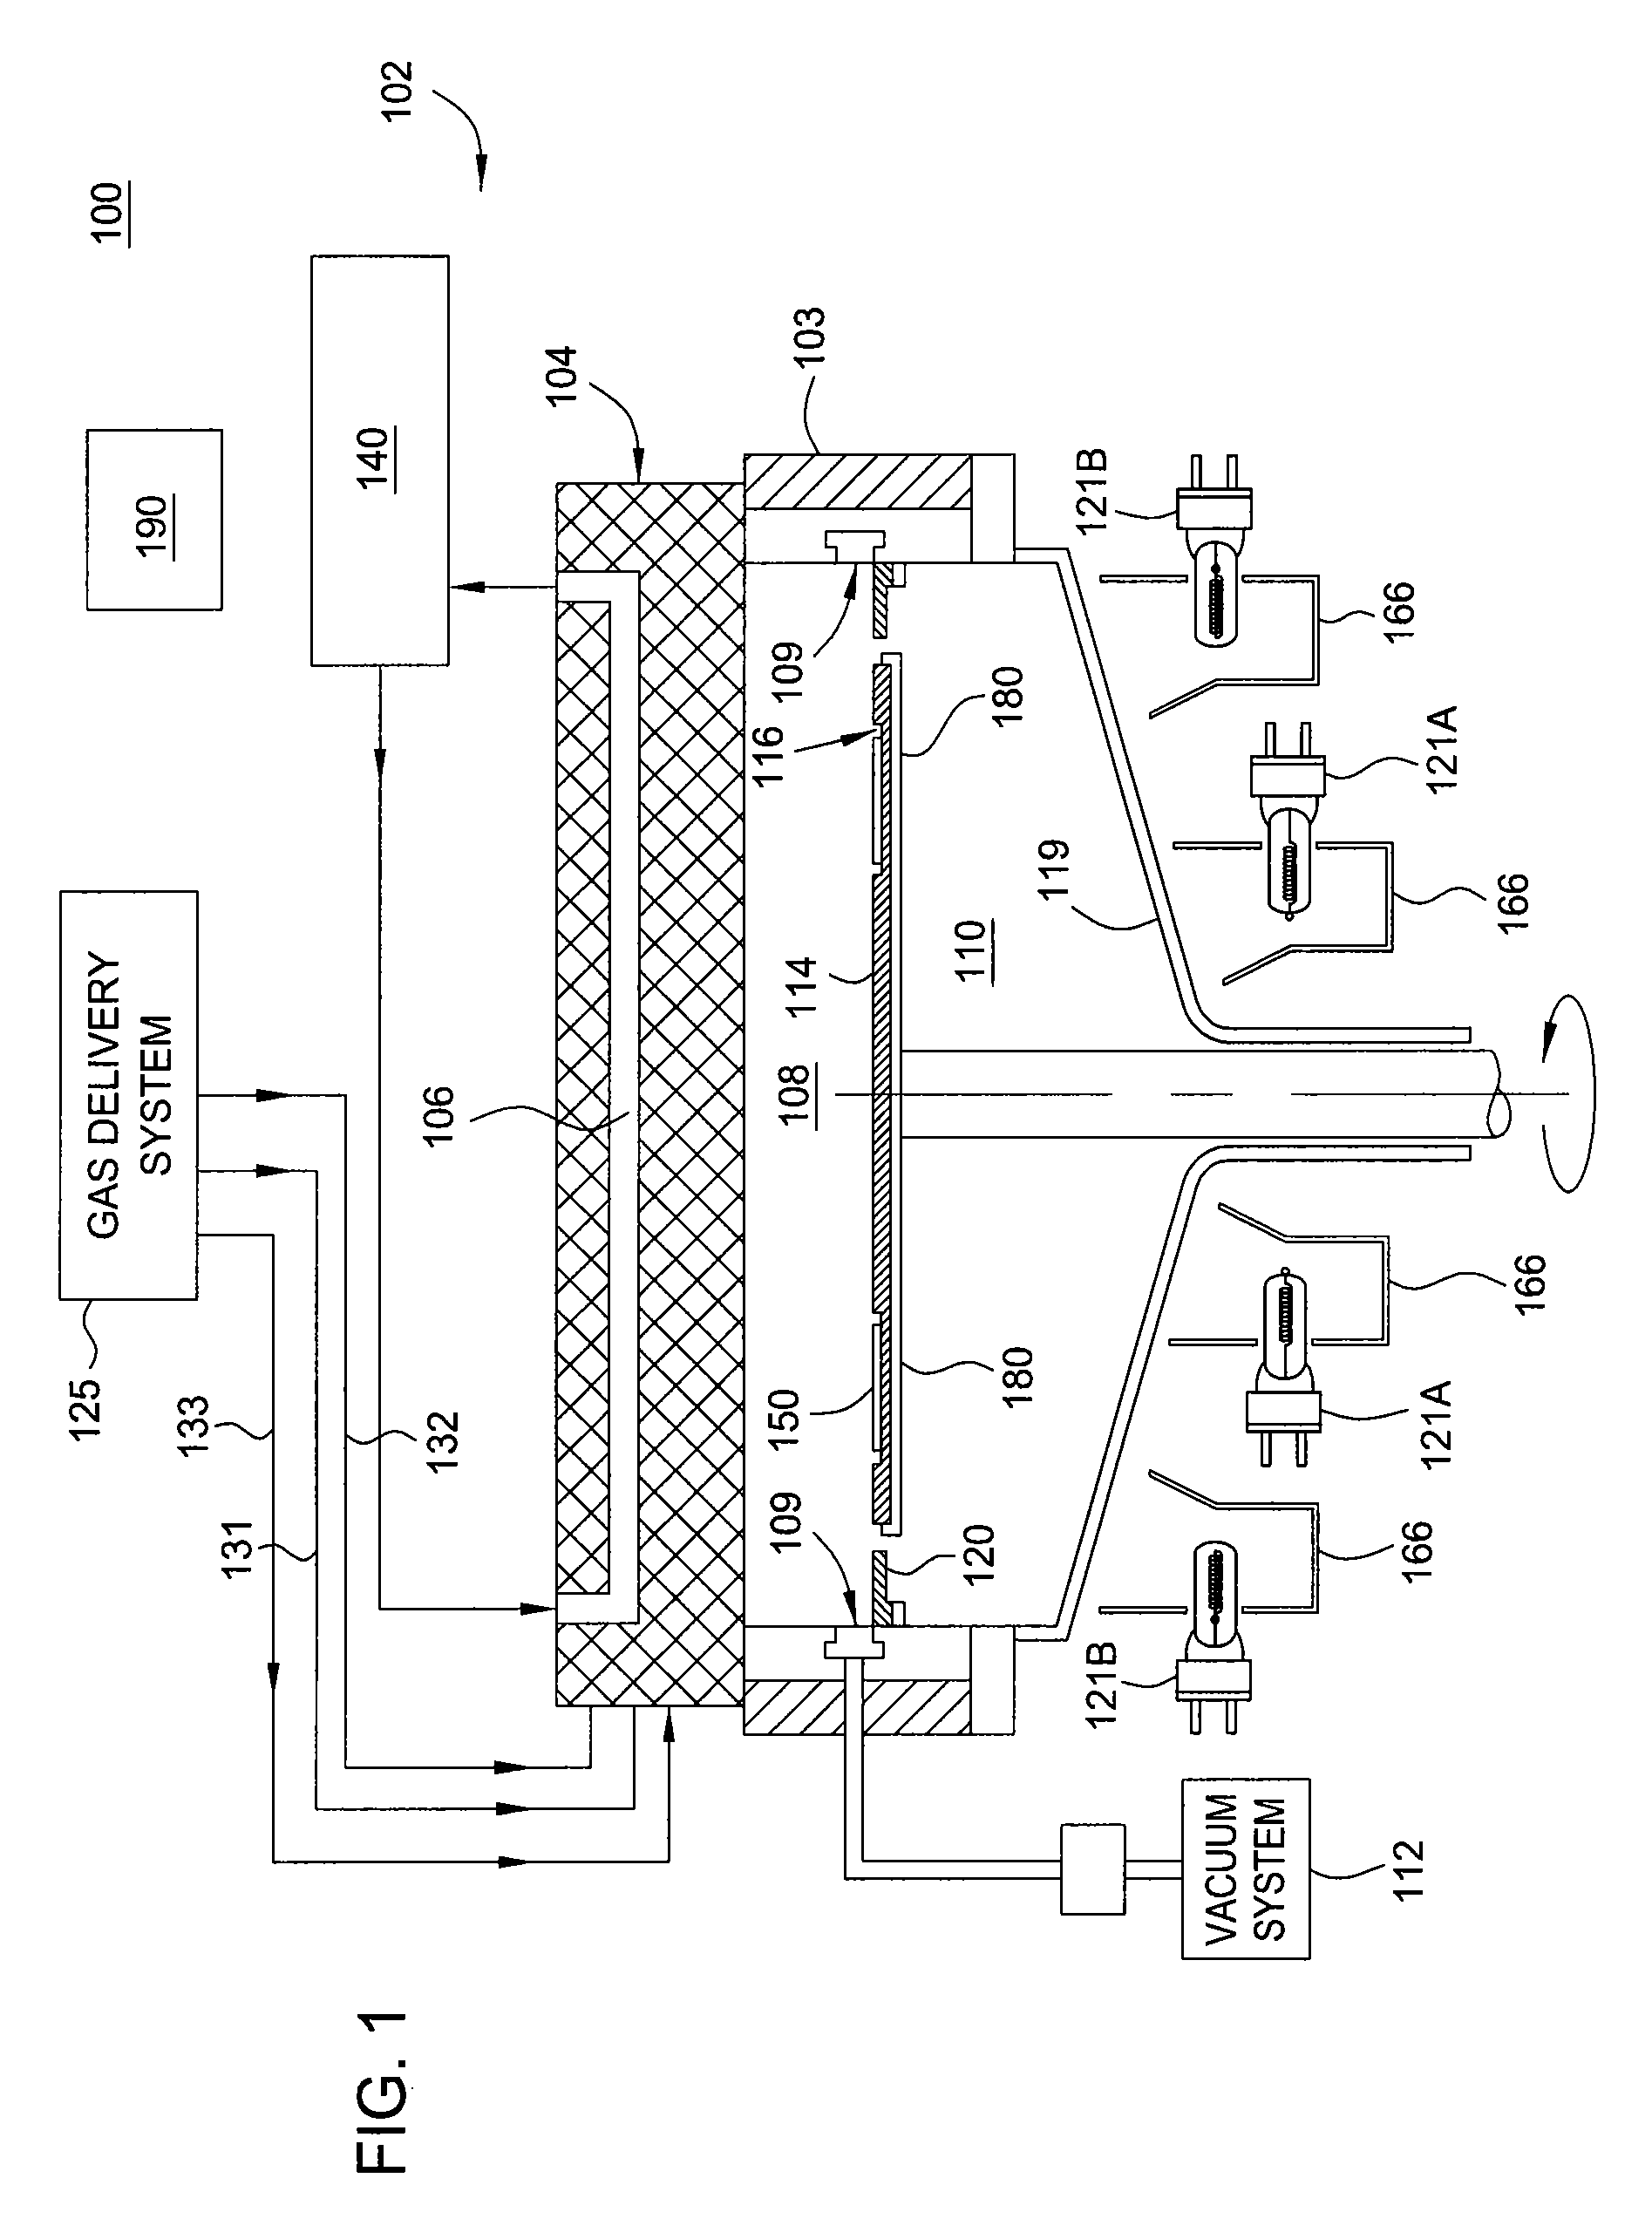 Method and apparatus for dry cleaning a cooled showerhead